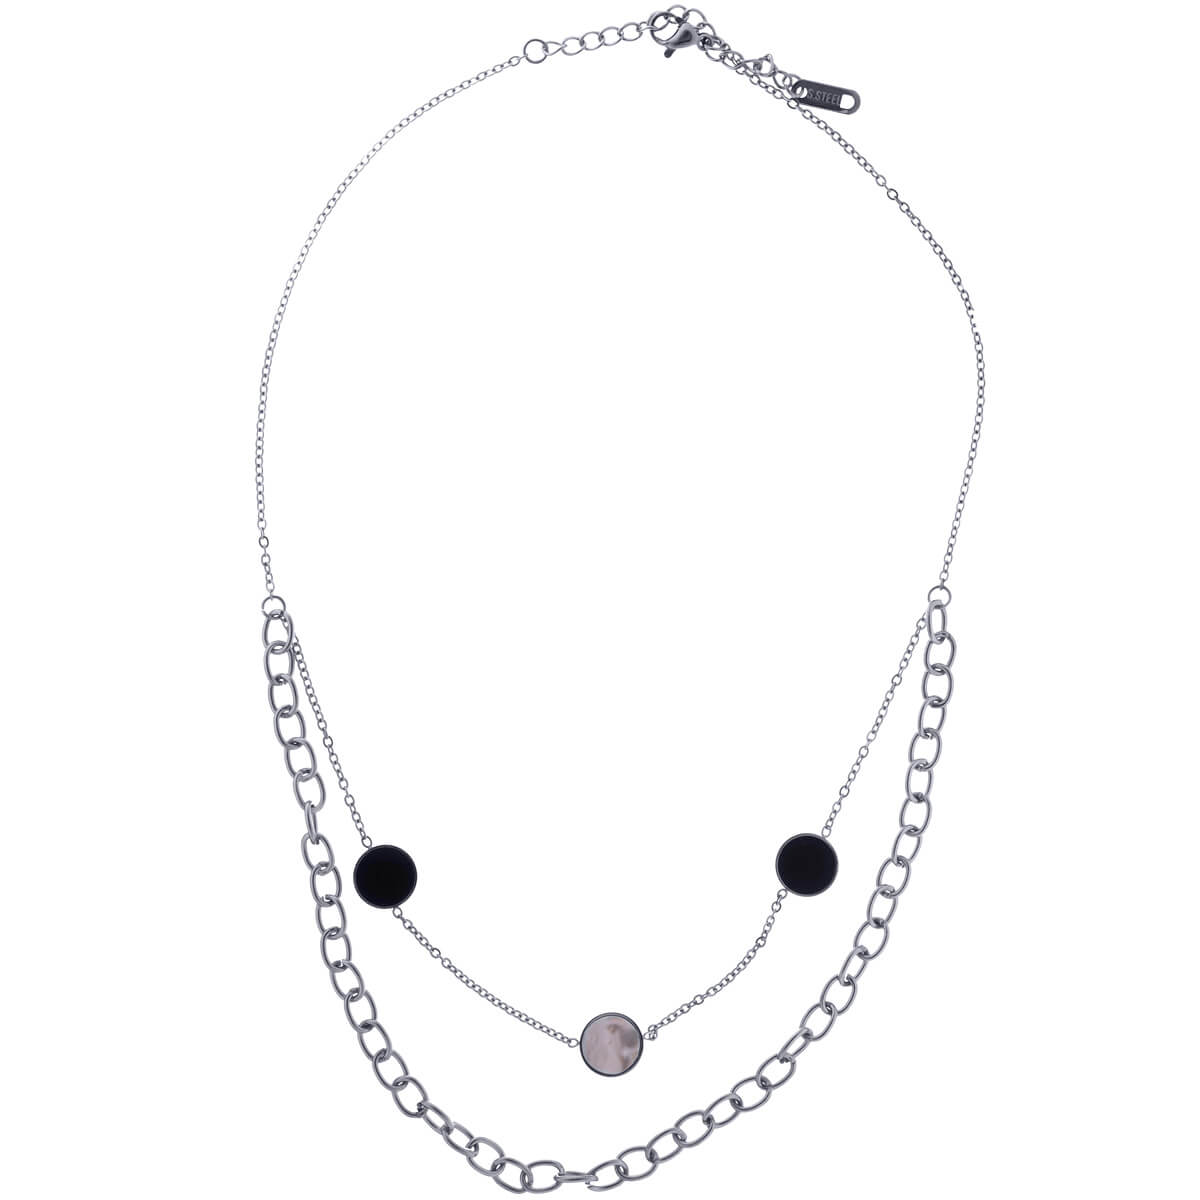 Double row chain necklace (steel)